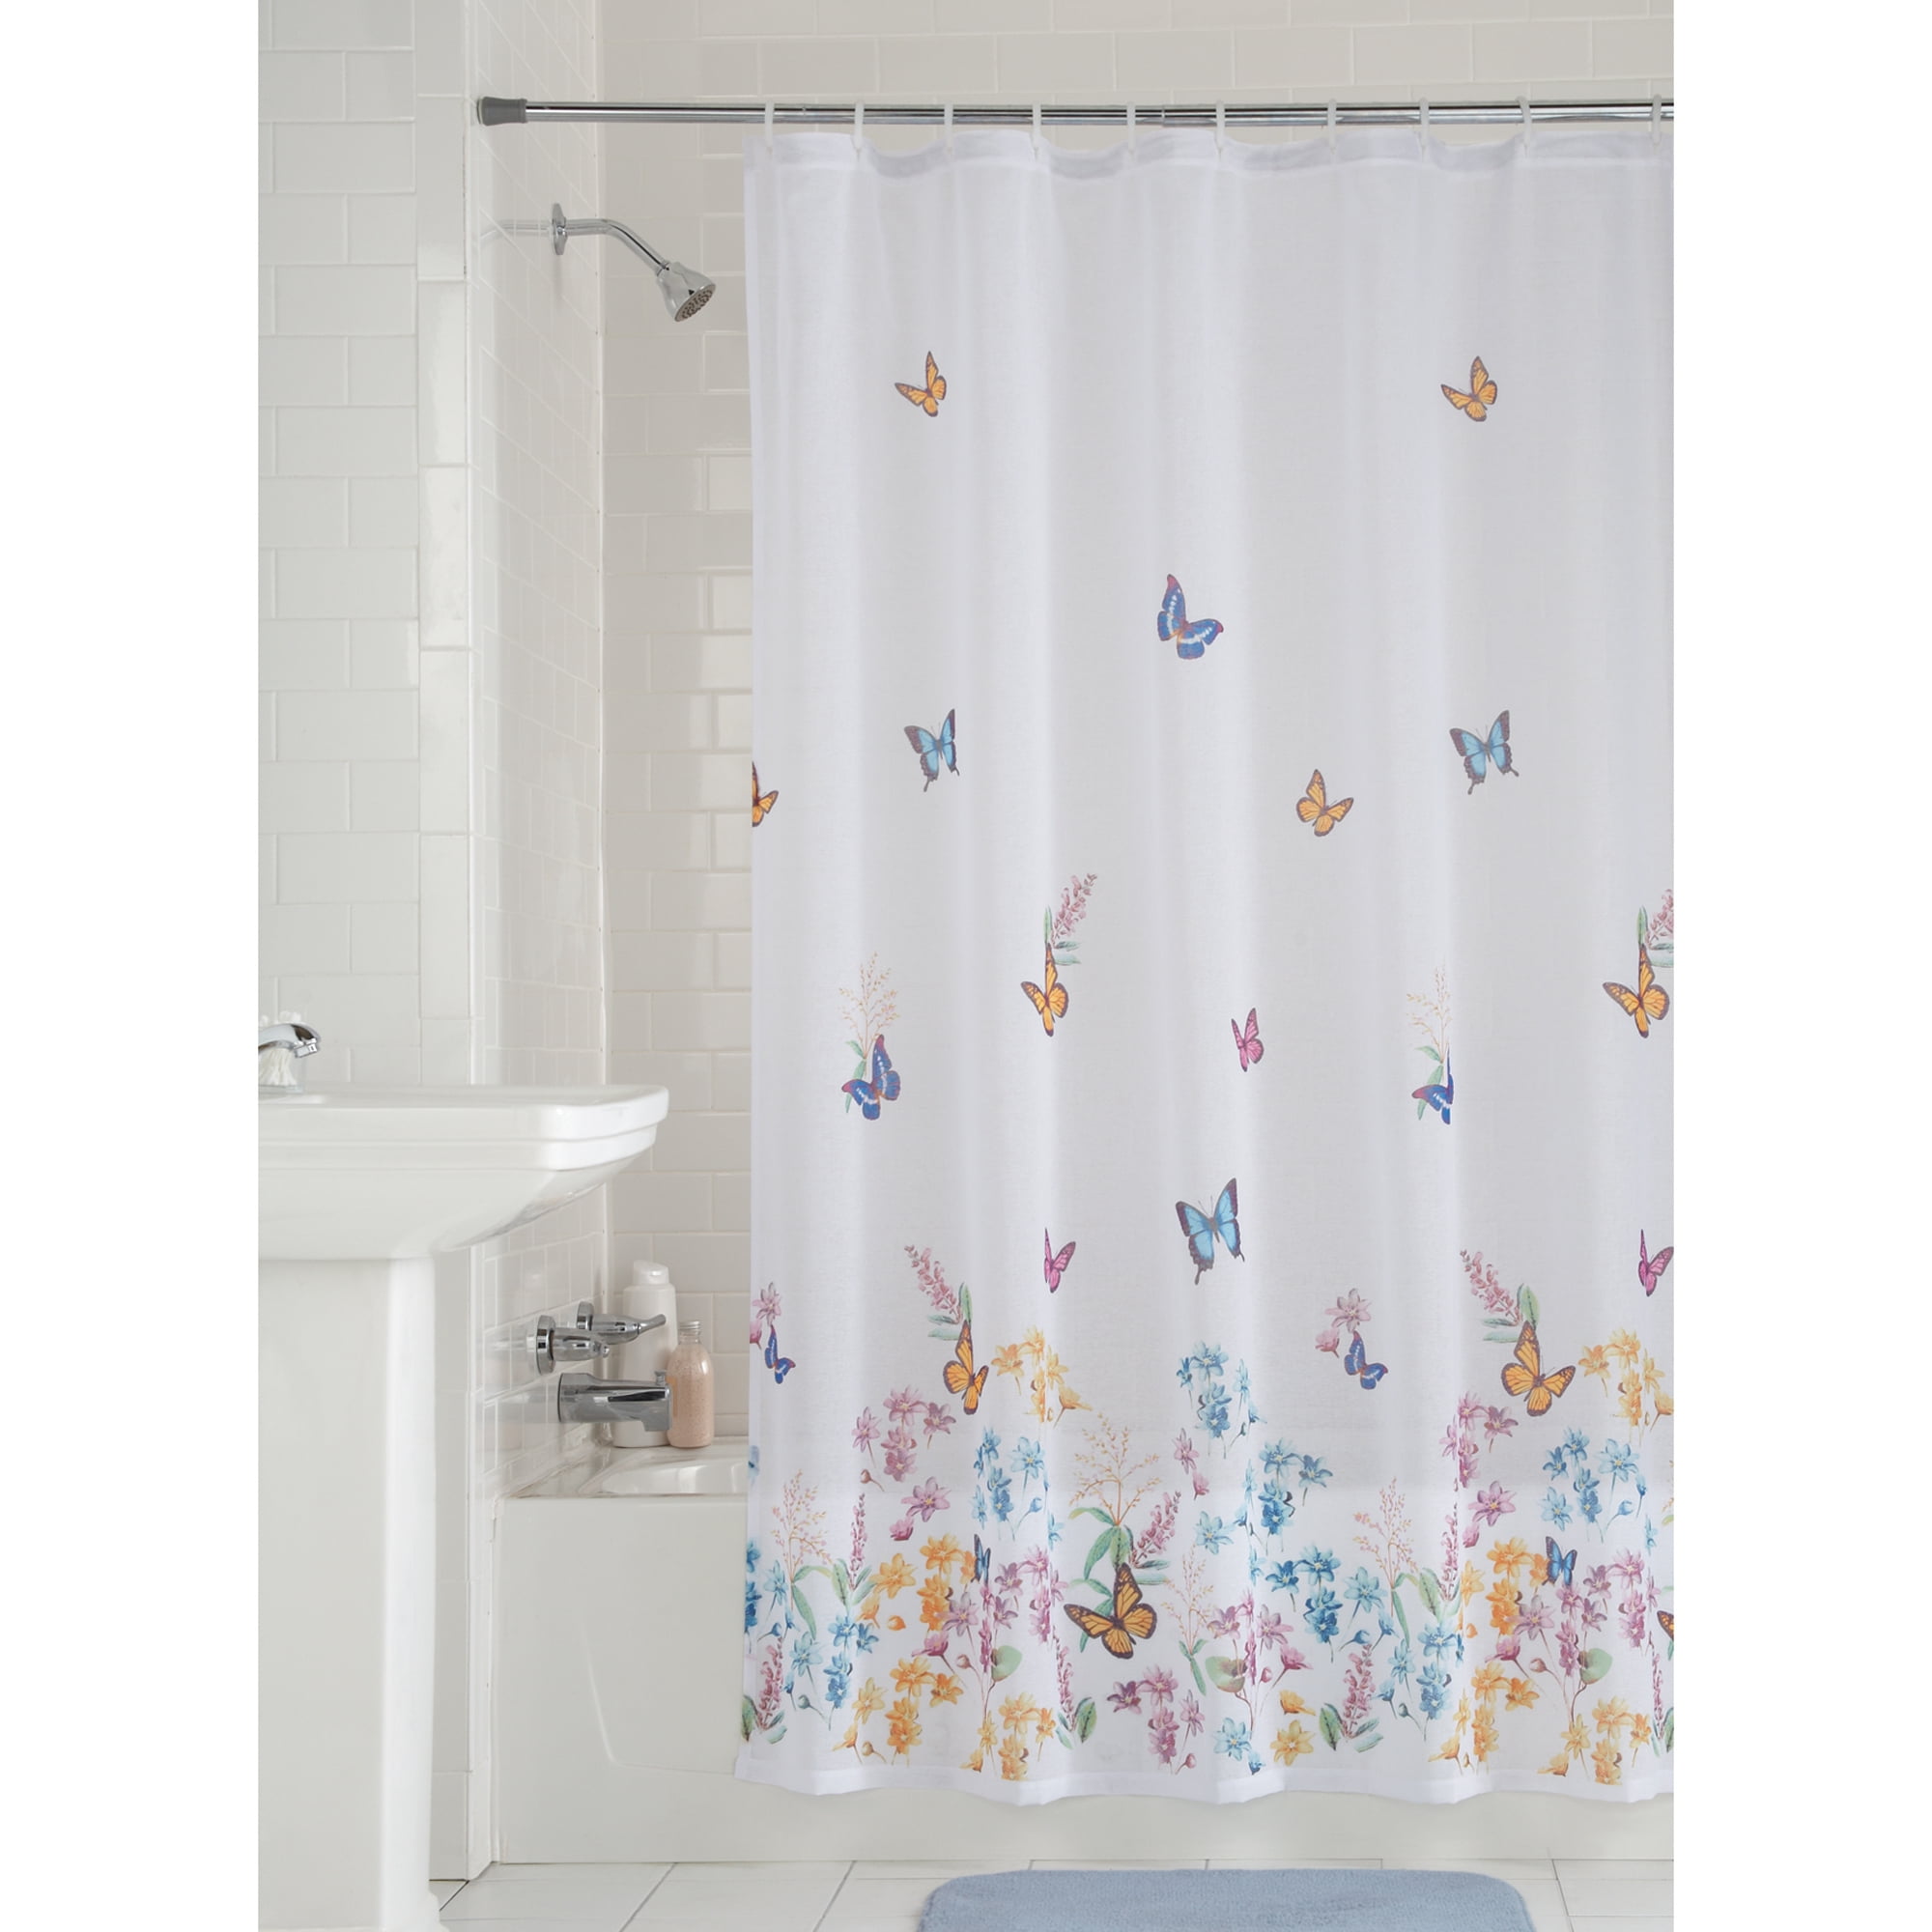 Details about   Lovely Teen Girls Colorful Butterfly Ruffles Shower Curtain 72 x 72"  New 